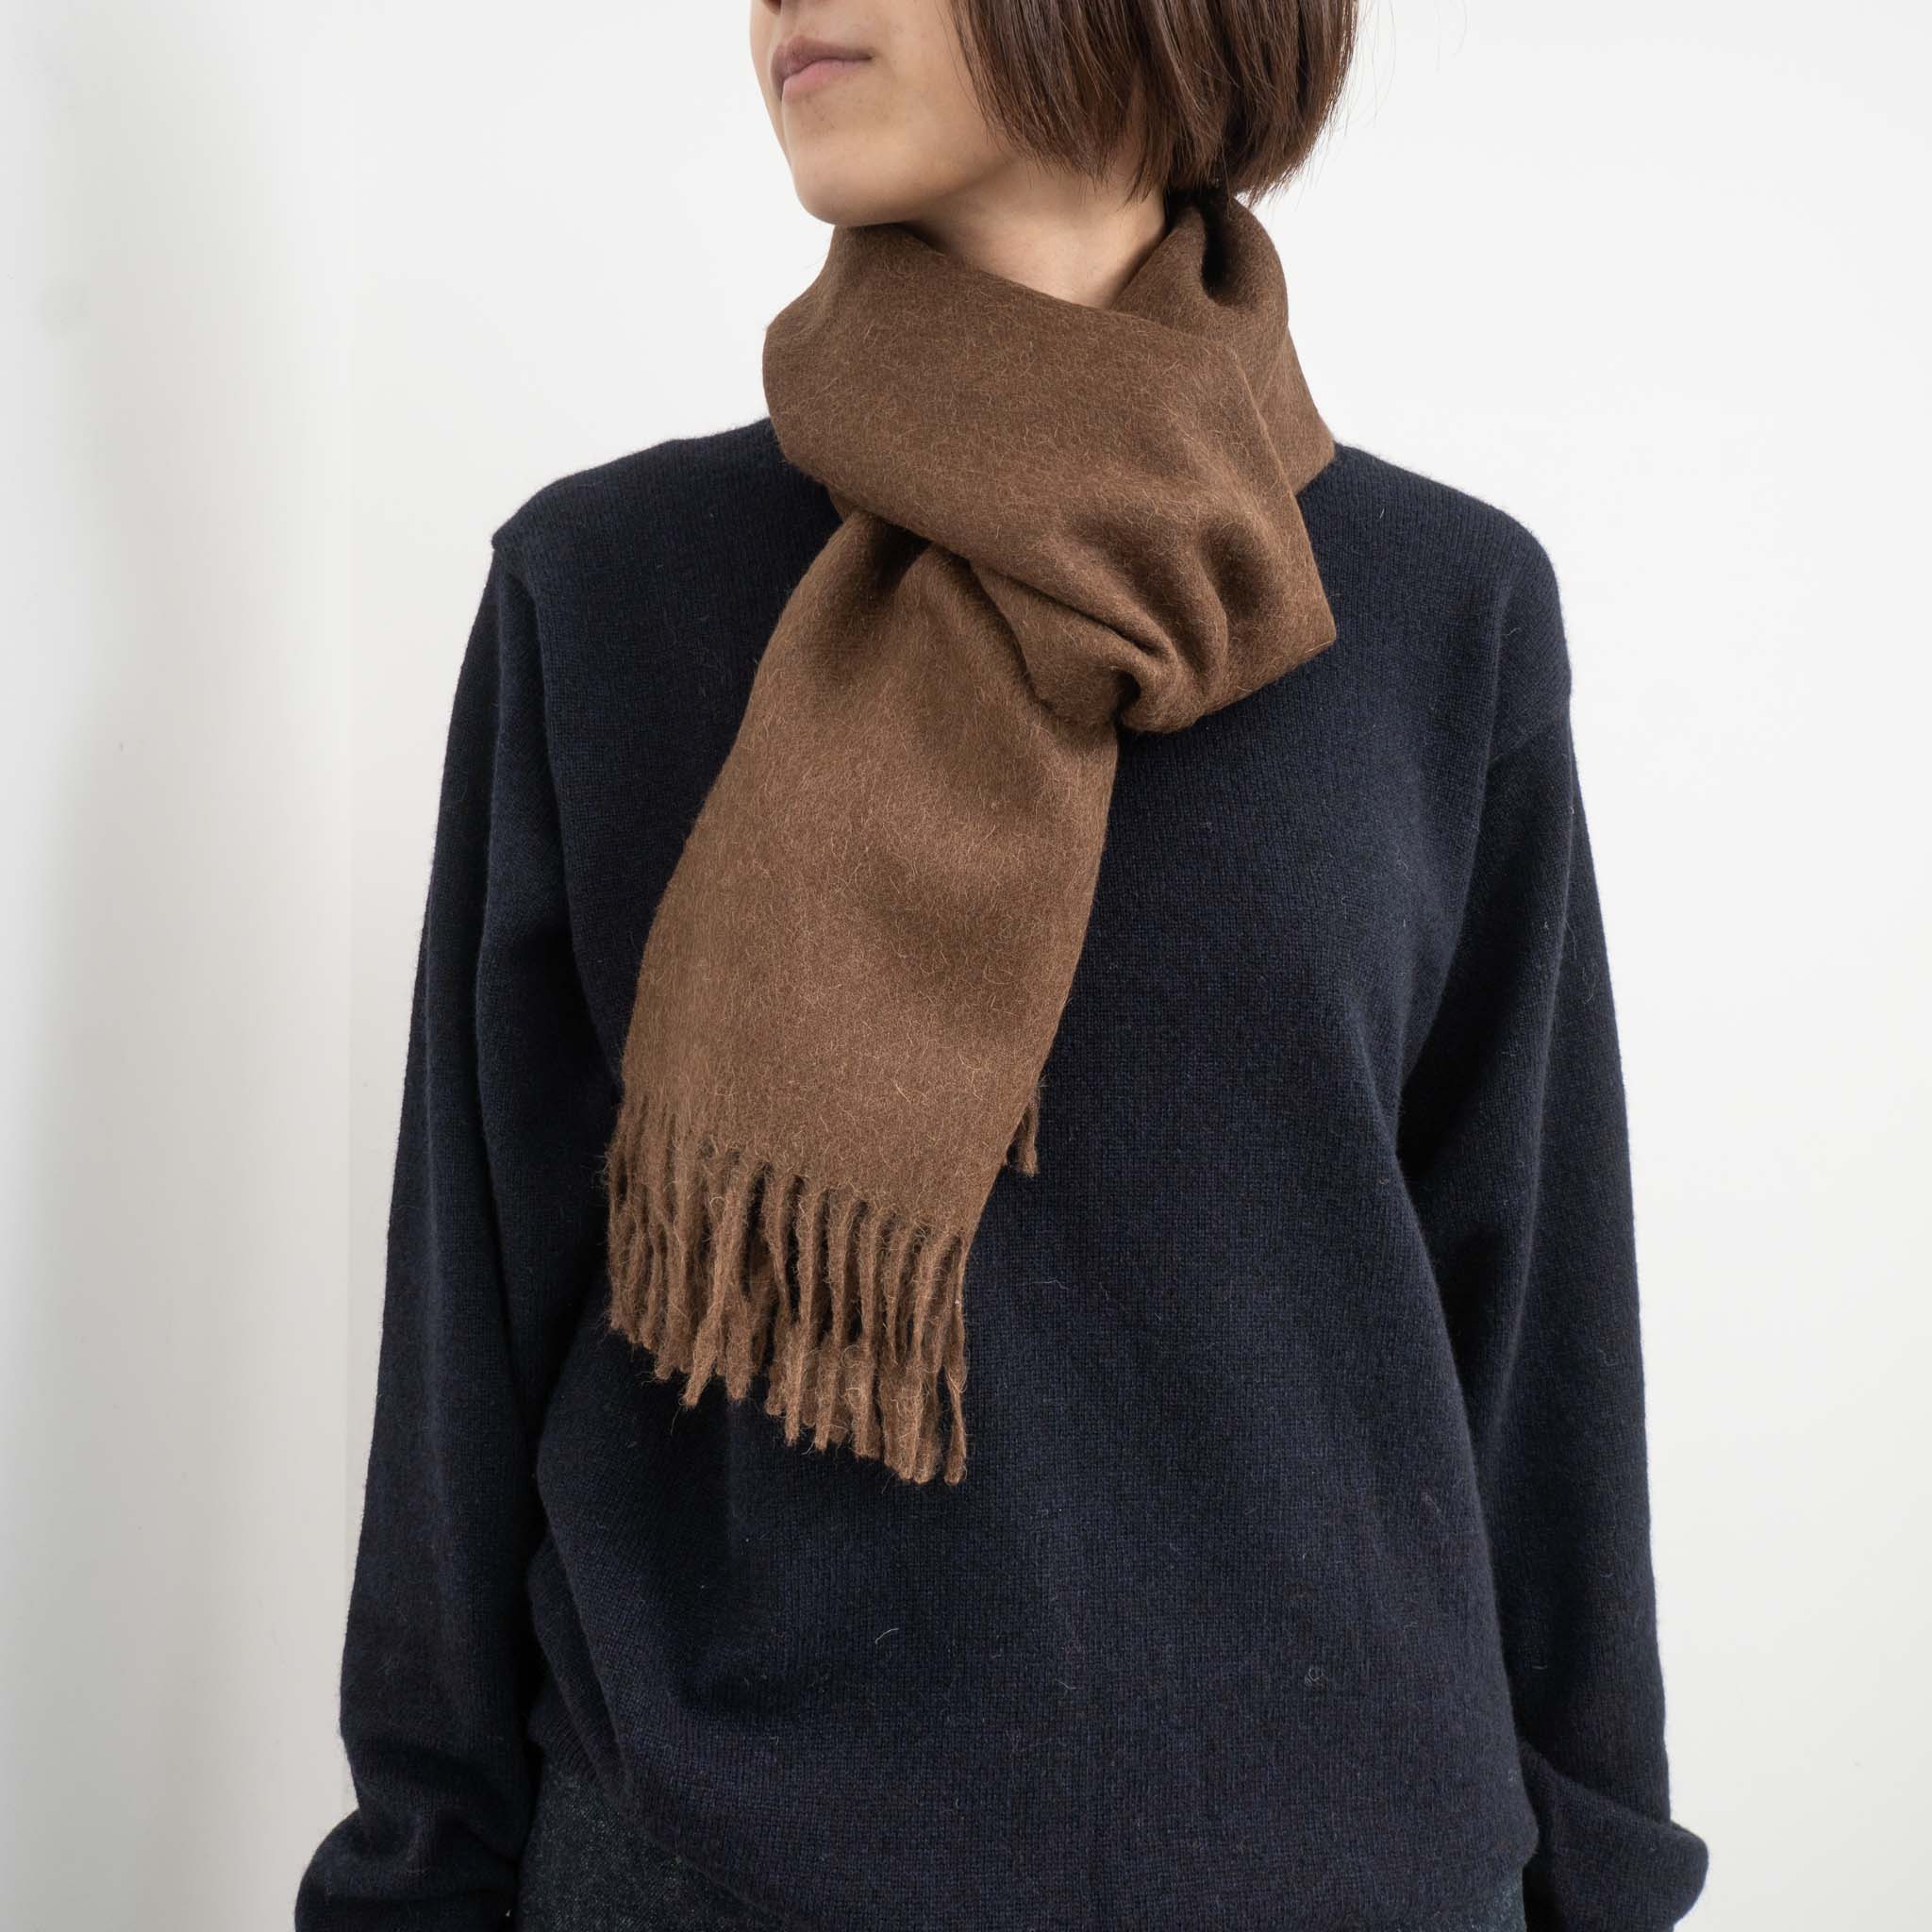 THE INOUE BROTHERS Brushed Scarf LT.GREY - マフラー